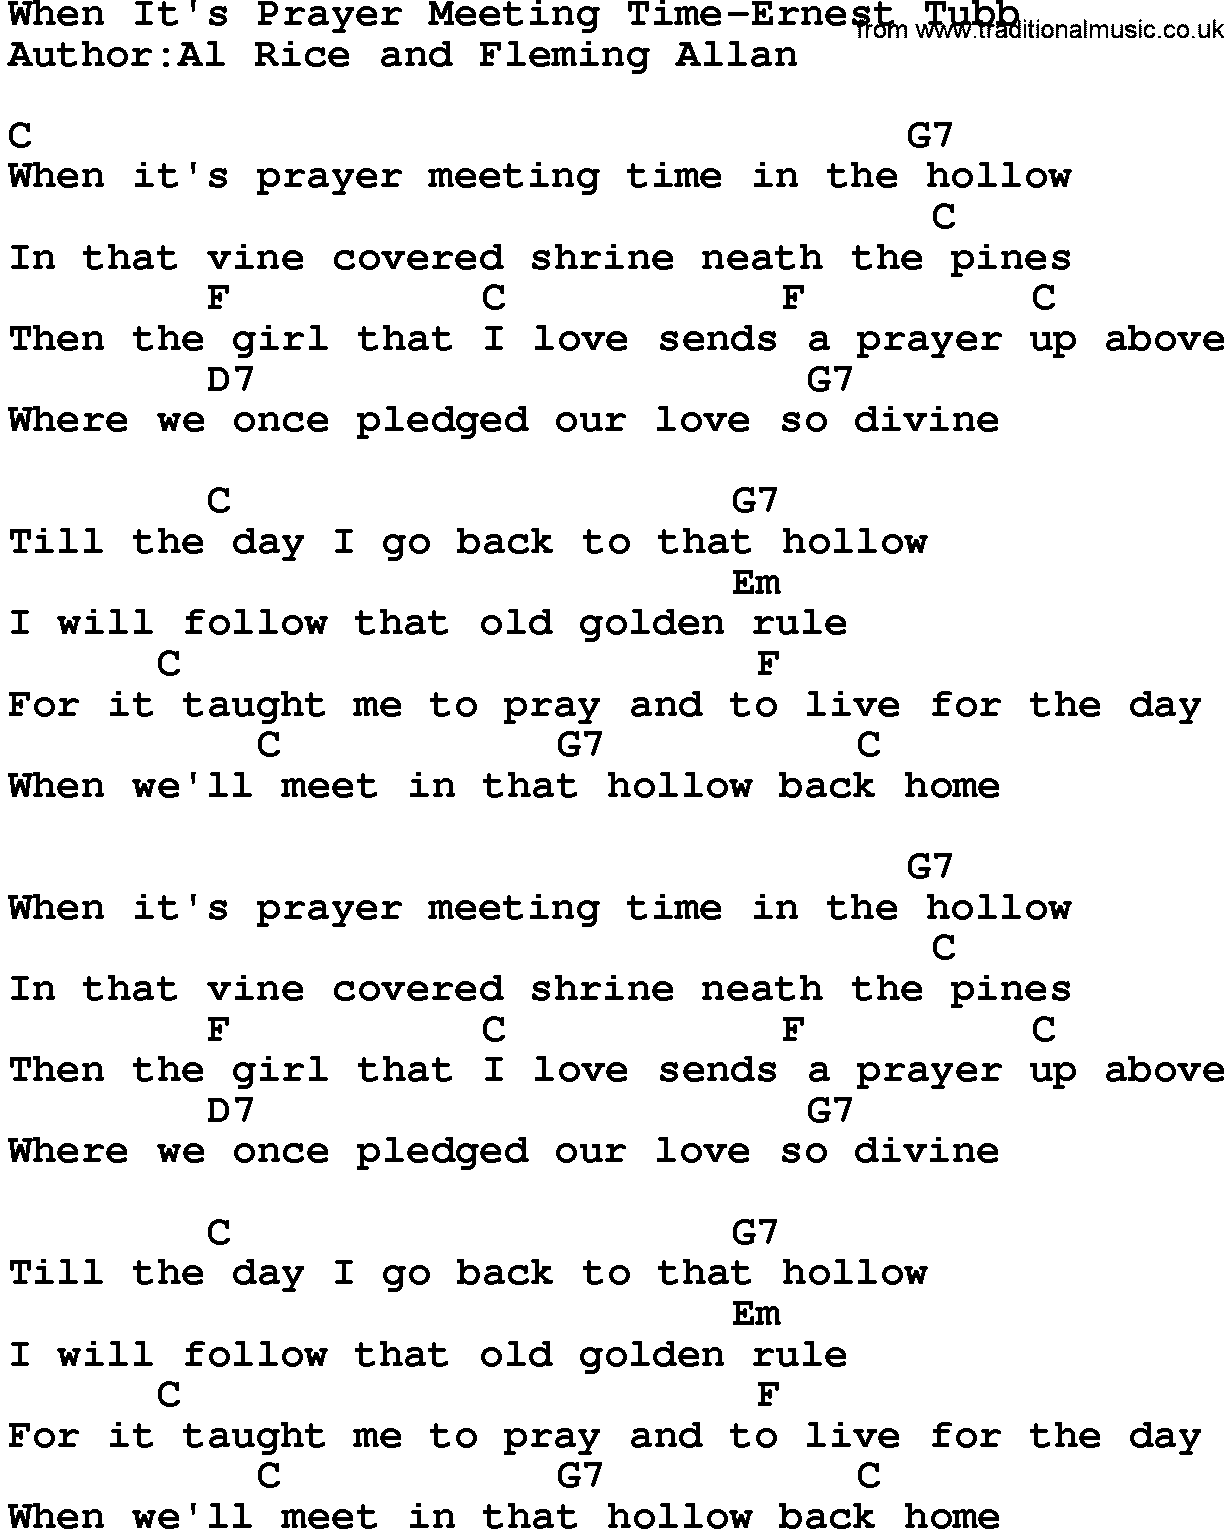 Country music song: When It's Prayer Meeting Time-Ernest Tubb lyrics and chords